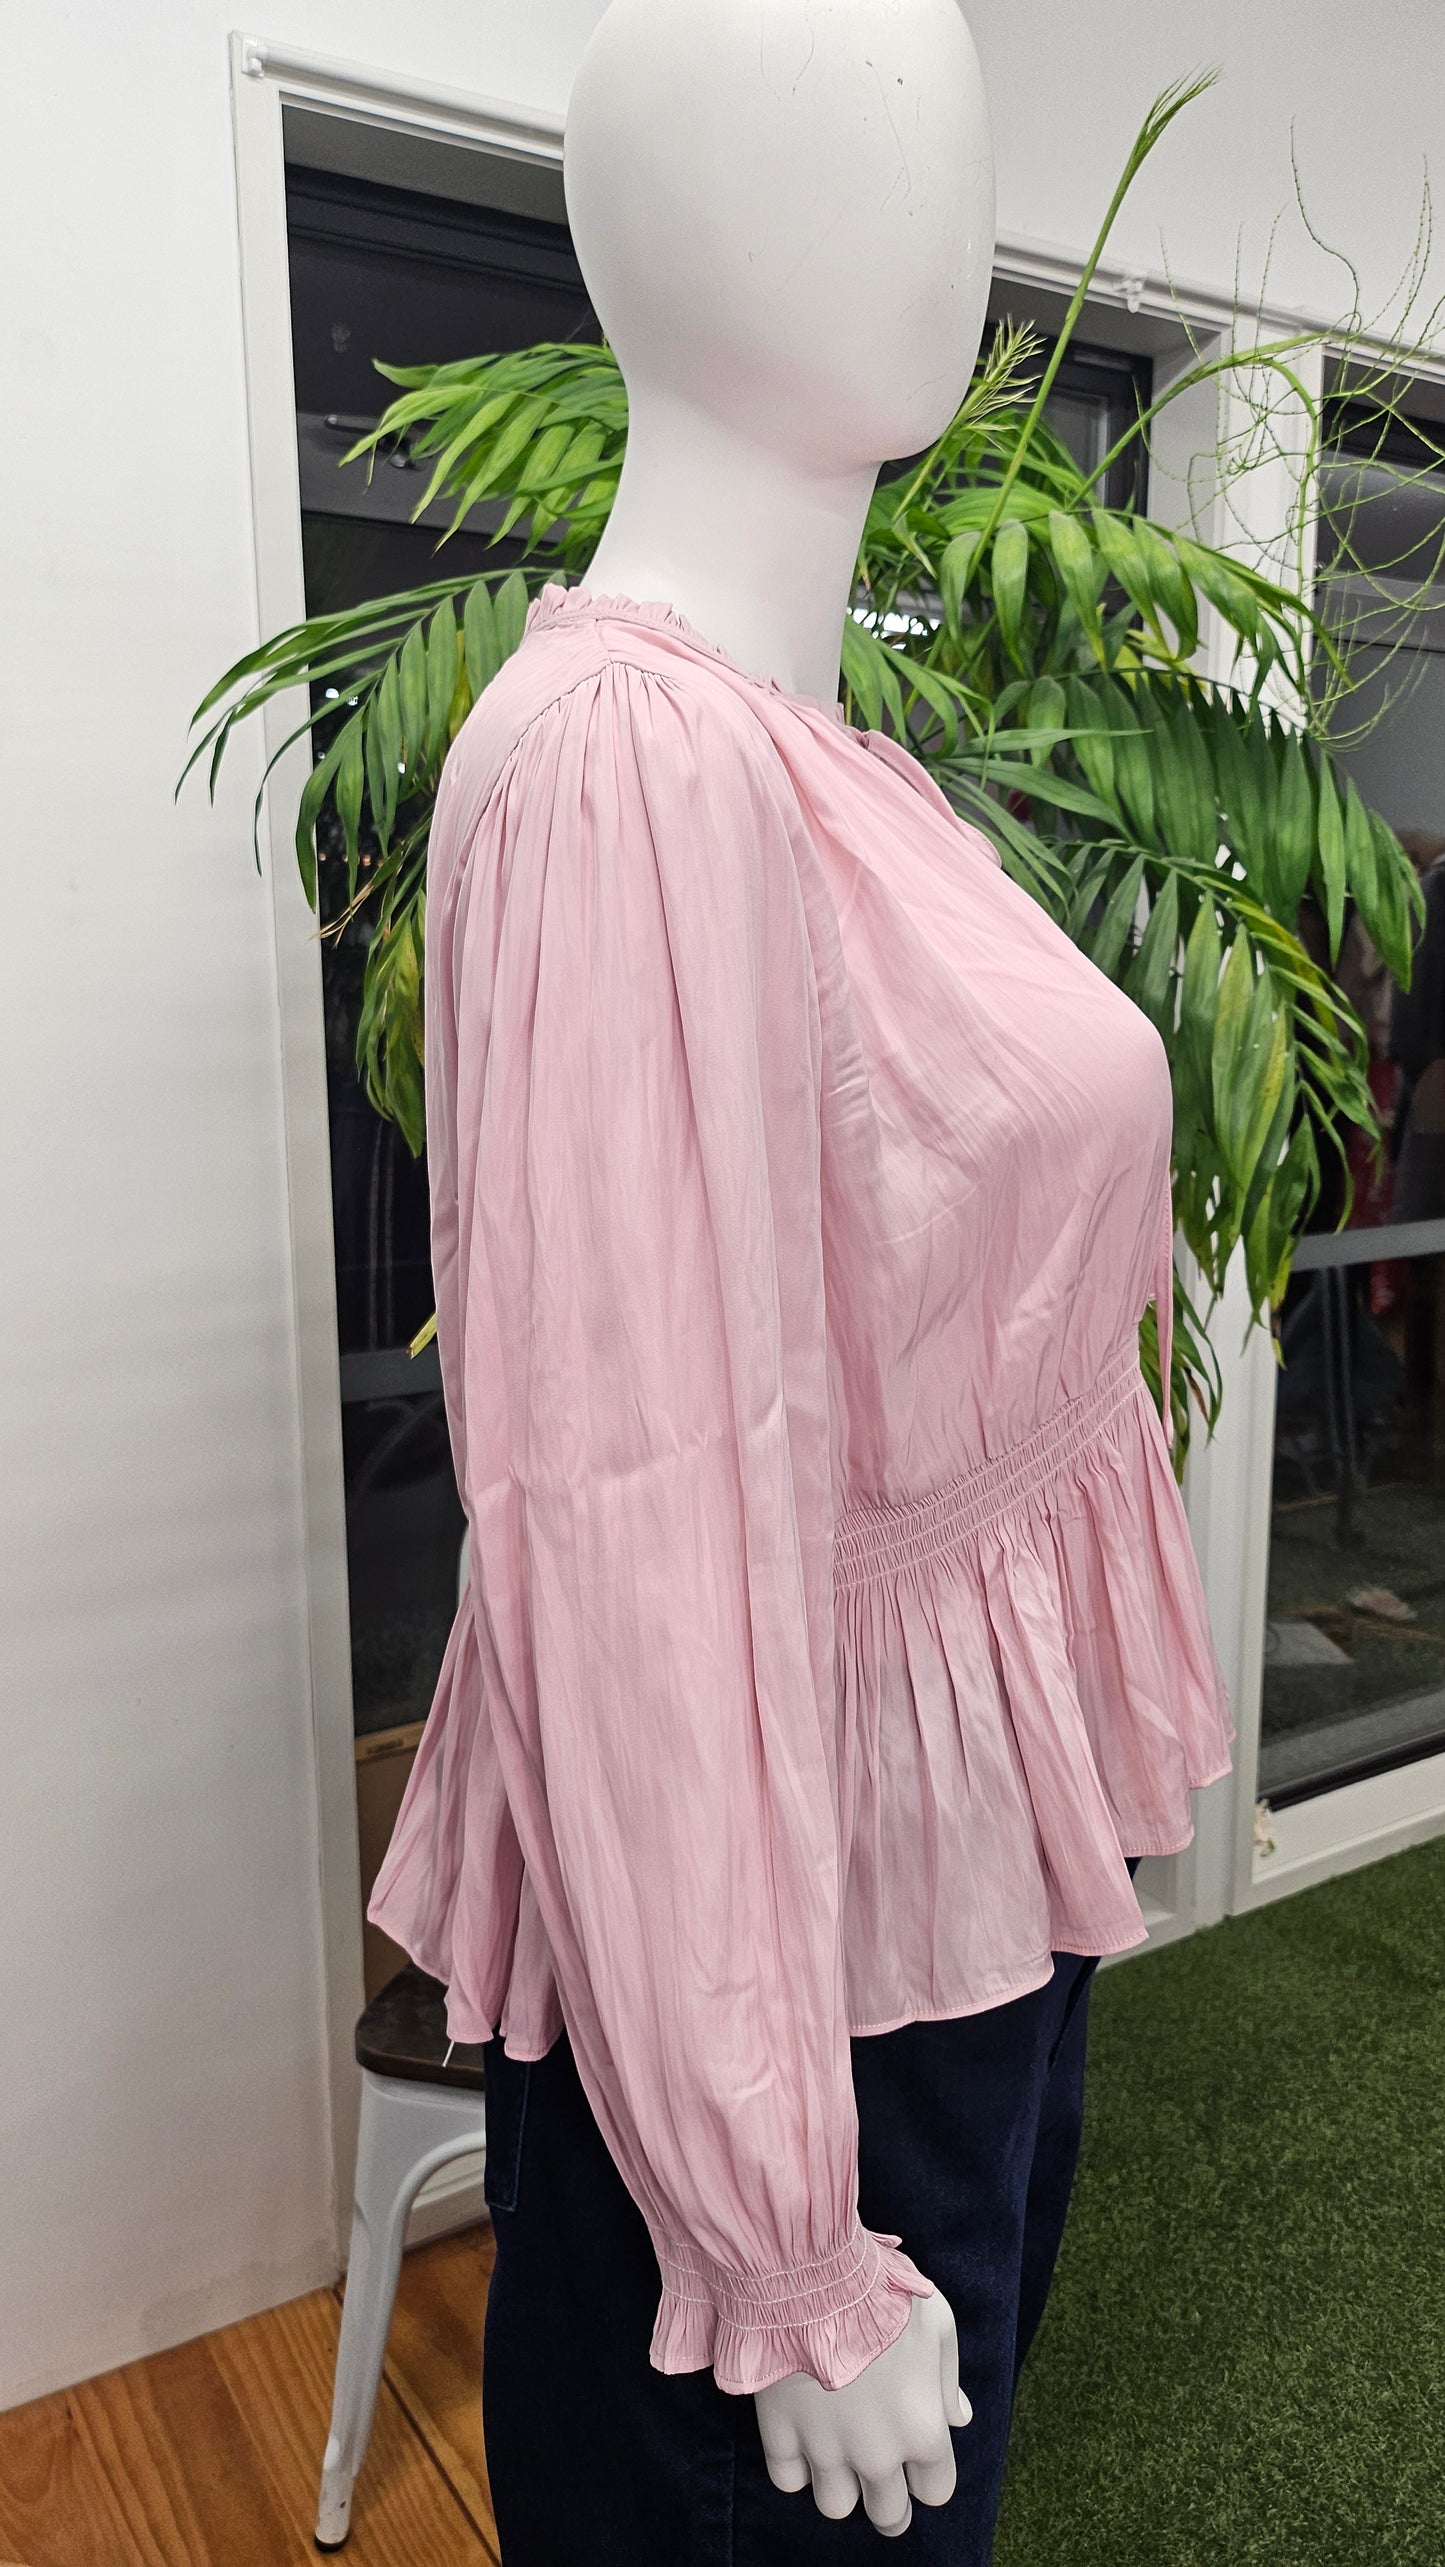 Ezibuy Baby Pink Ruched Blouse BNWT (20)